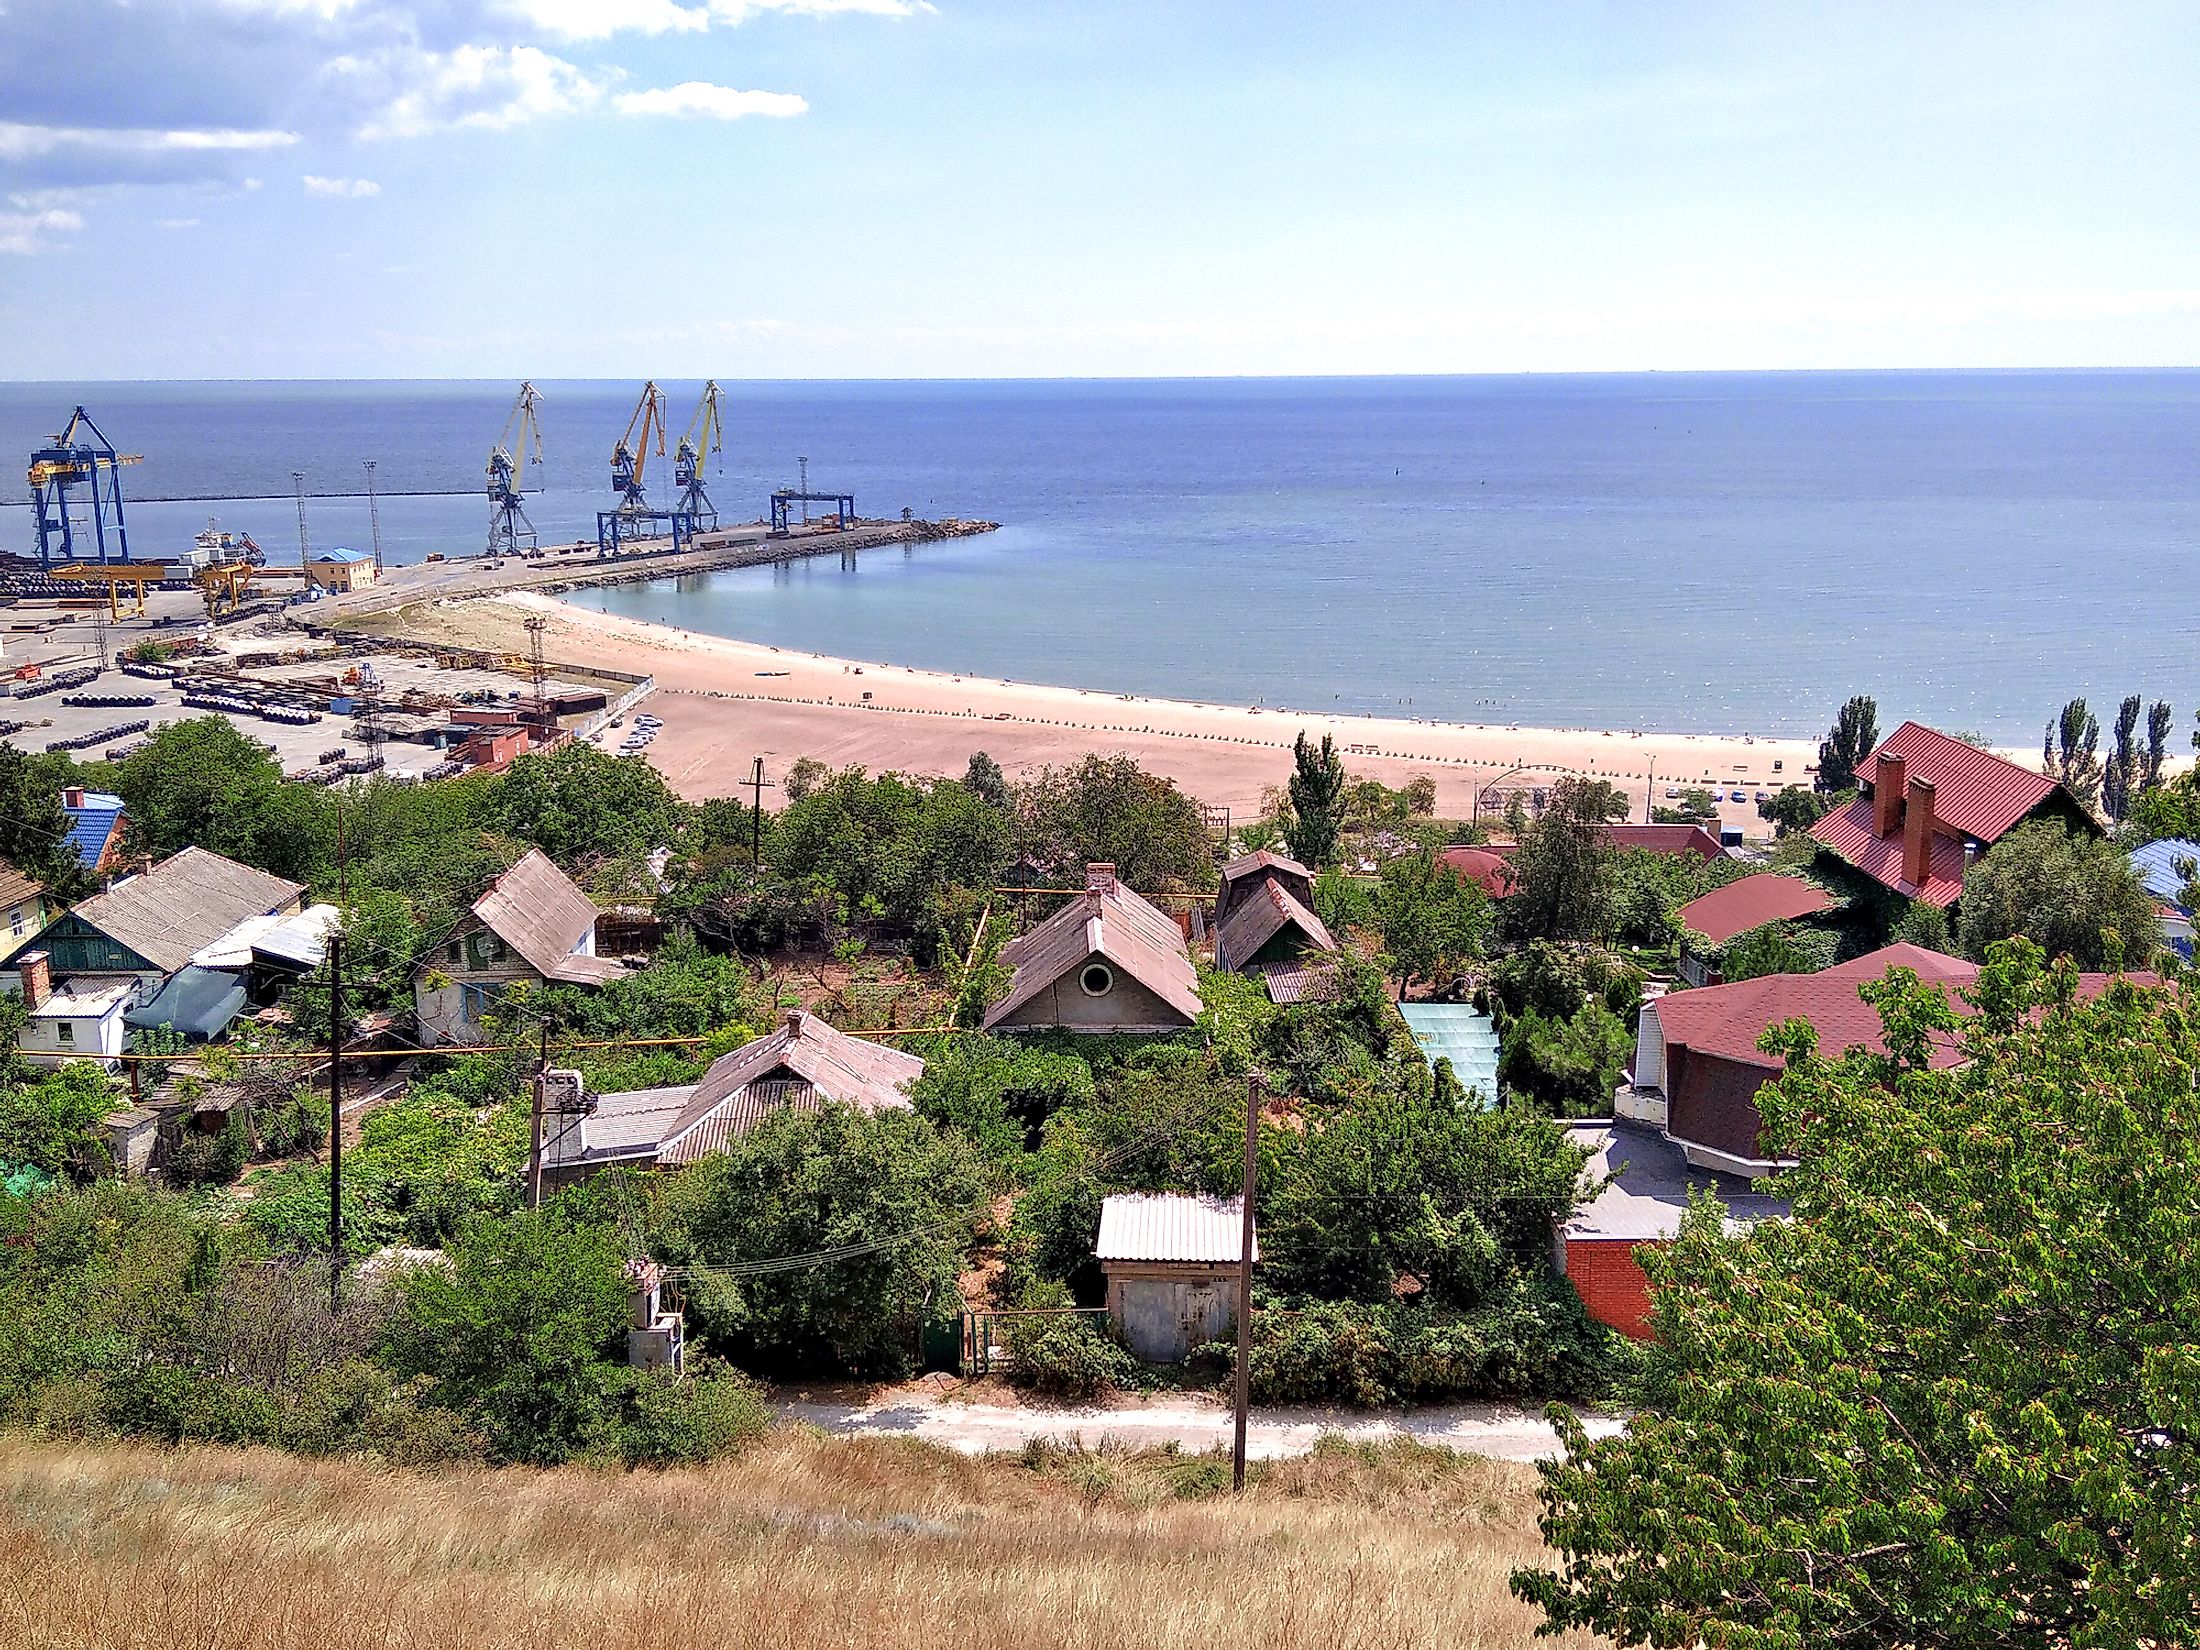 View of the coast of the Azov Sea in Mariupol.